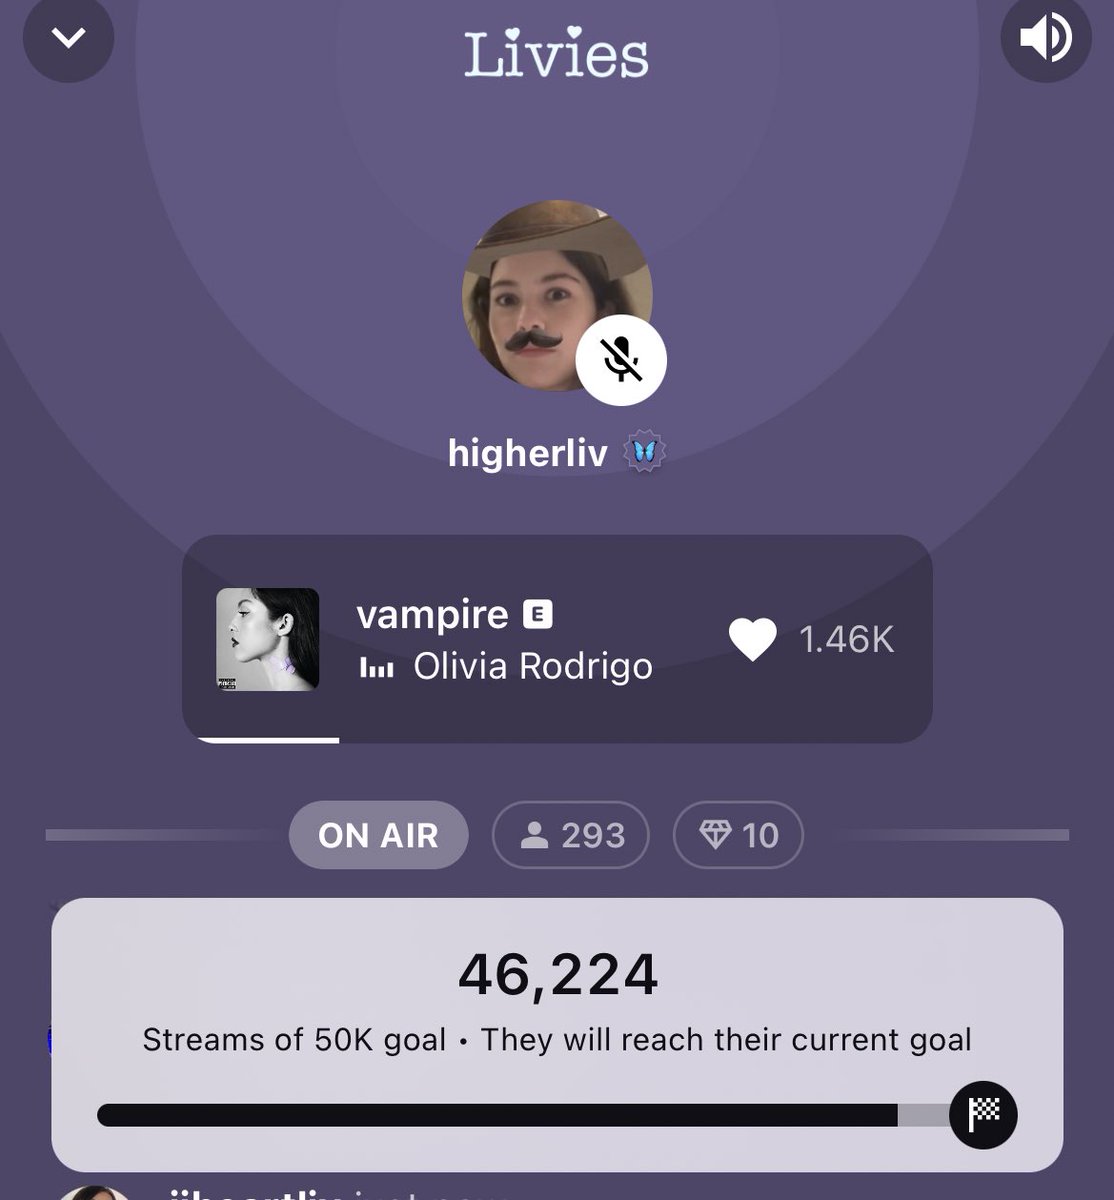 4k more…reminder that a special someone might join if we hit 50k!!! #STREAMVAMPIRE